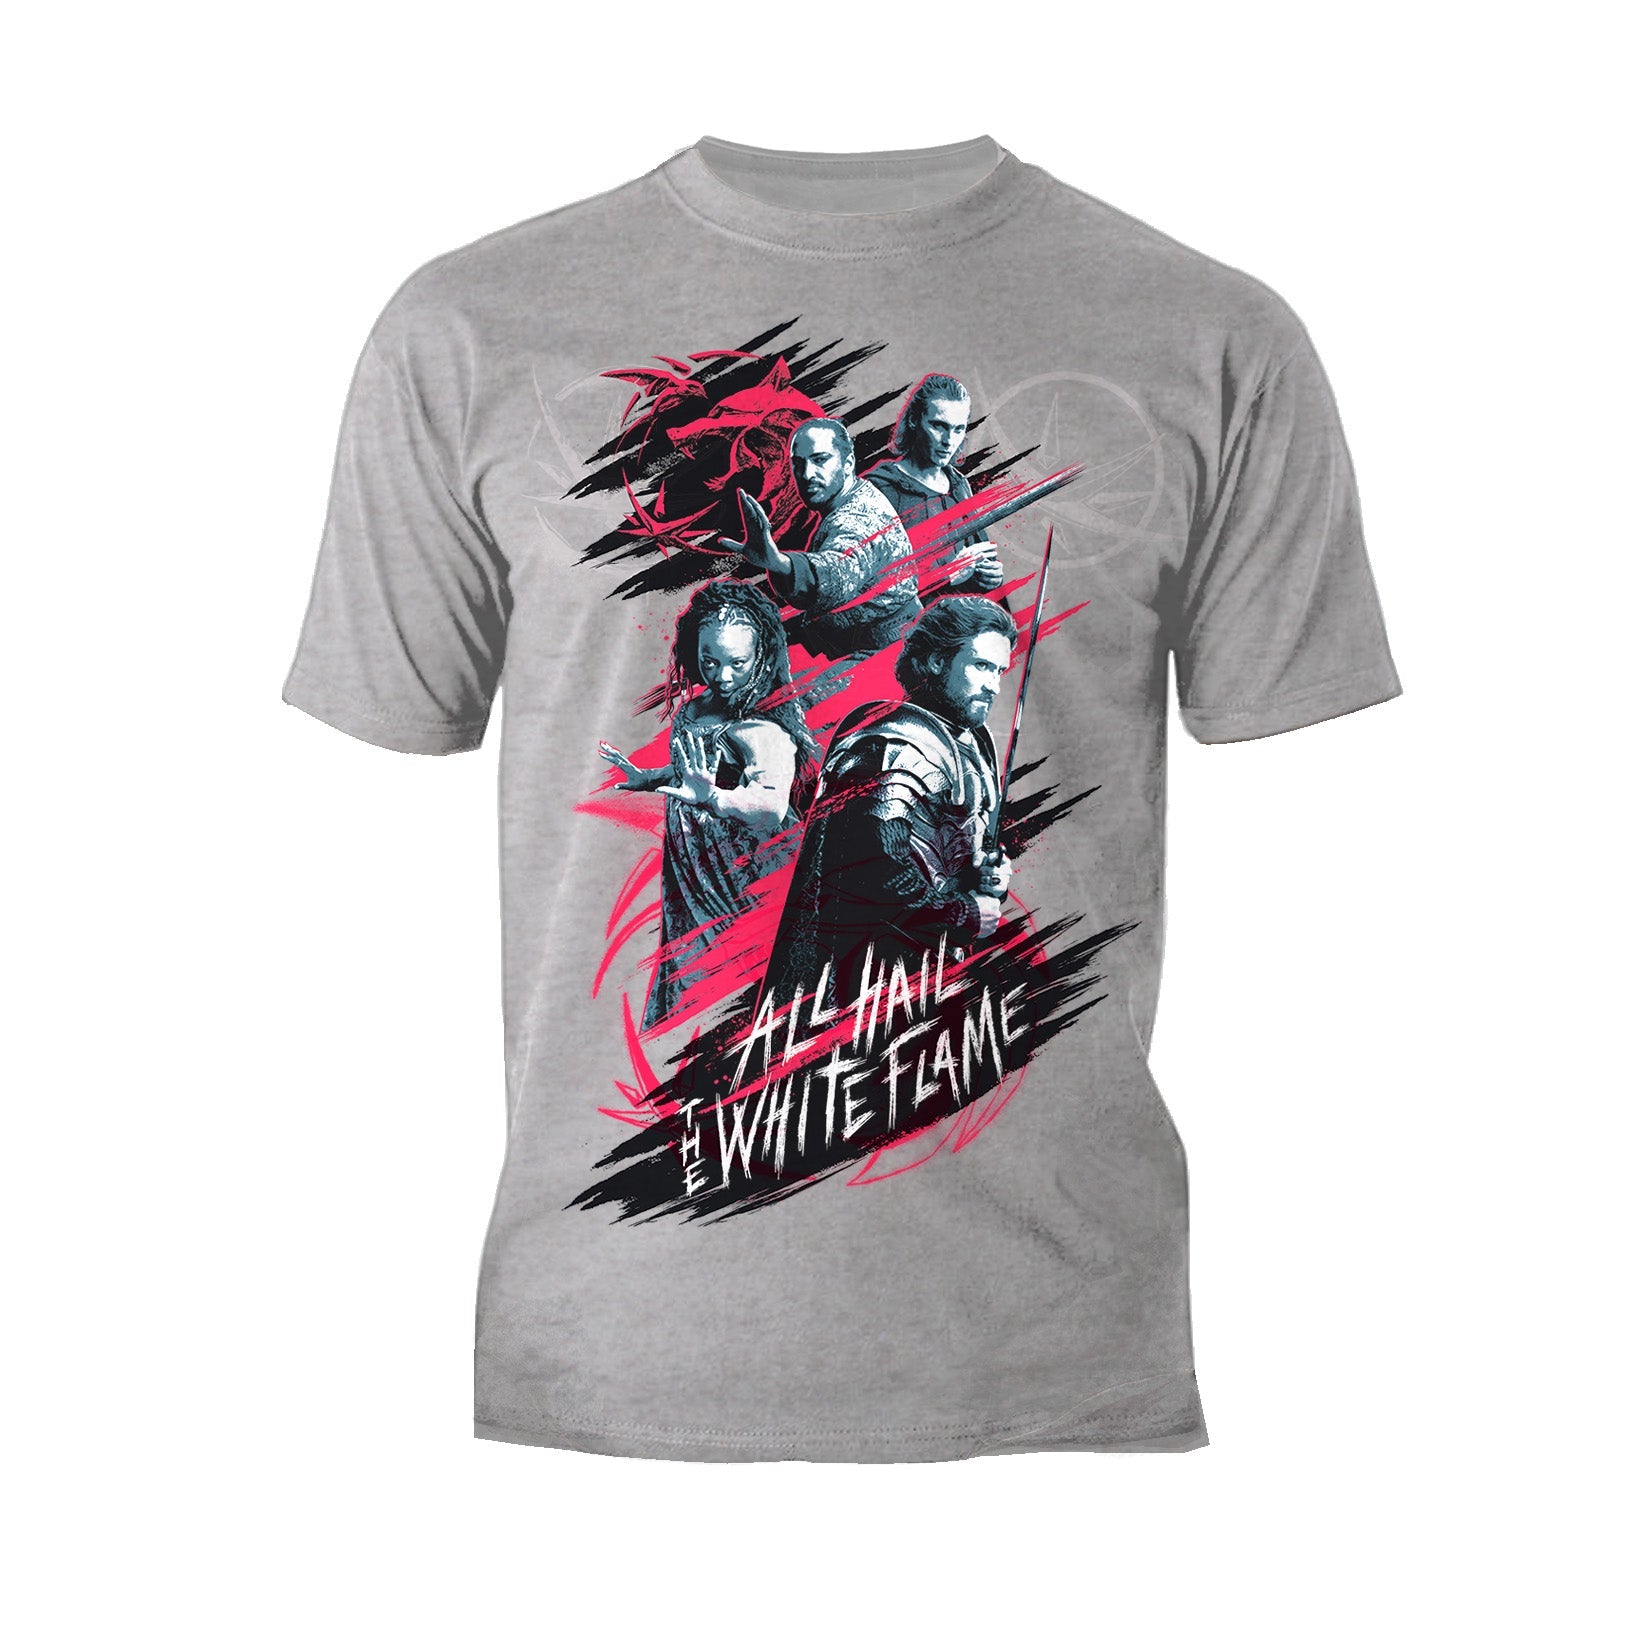 The Witcher Splash White Flame Official Men's T-Shirt